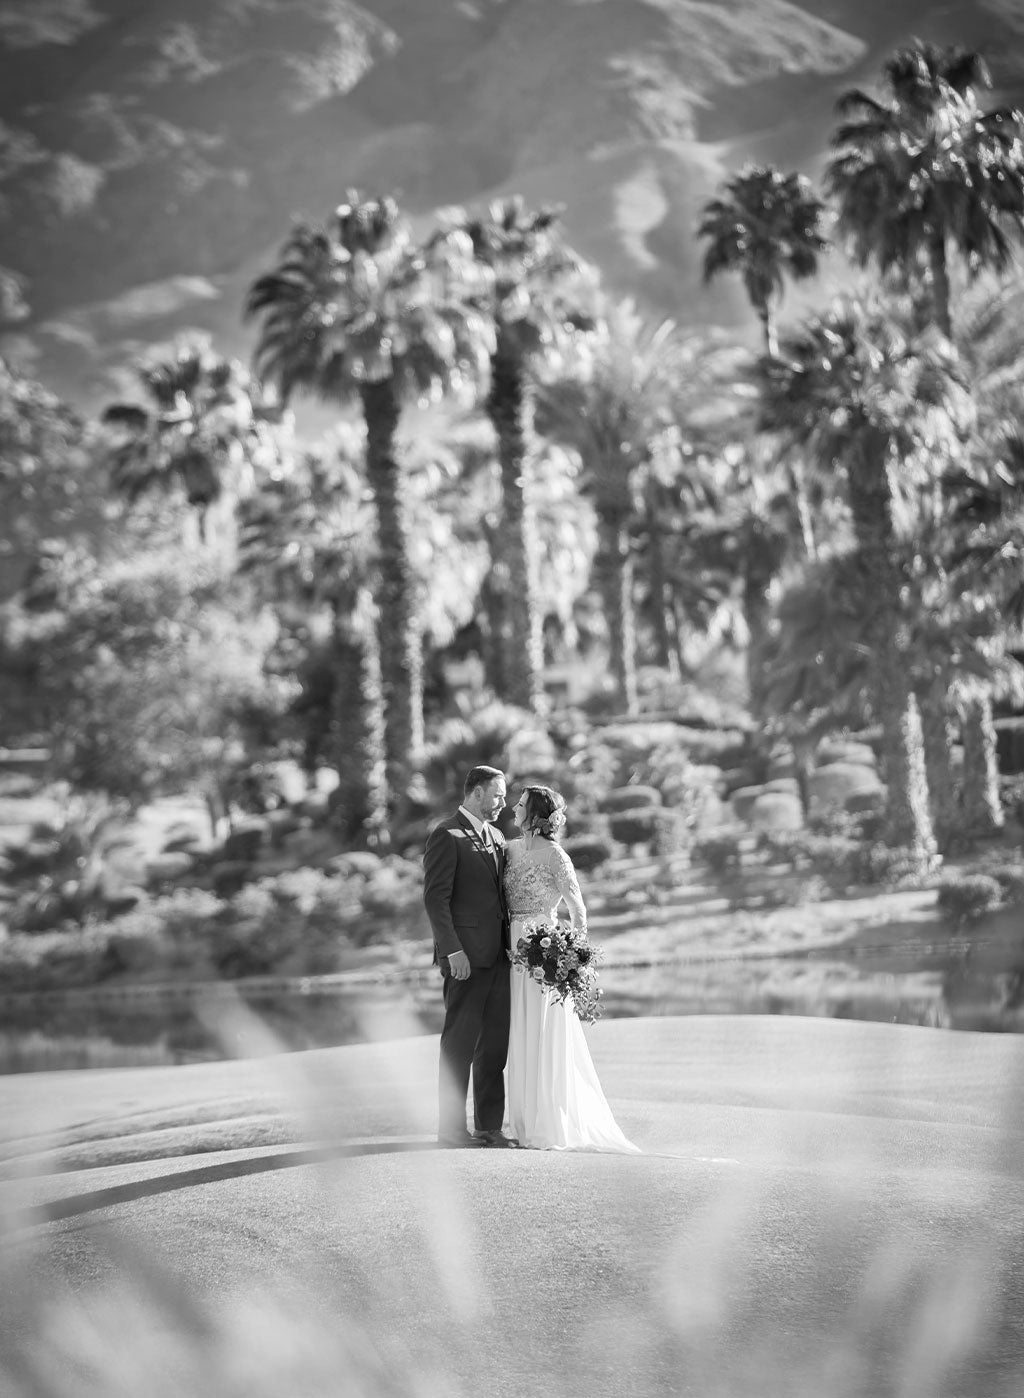 Bride and Groom with desert palm trees in background